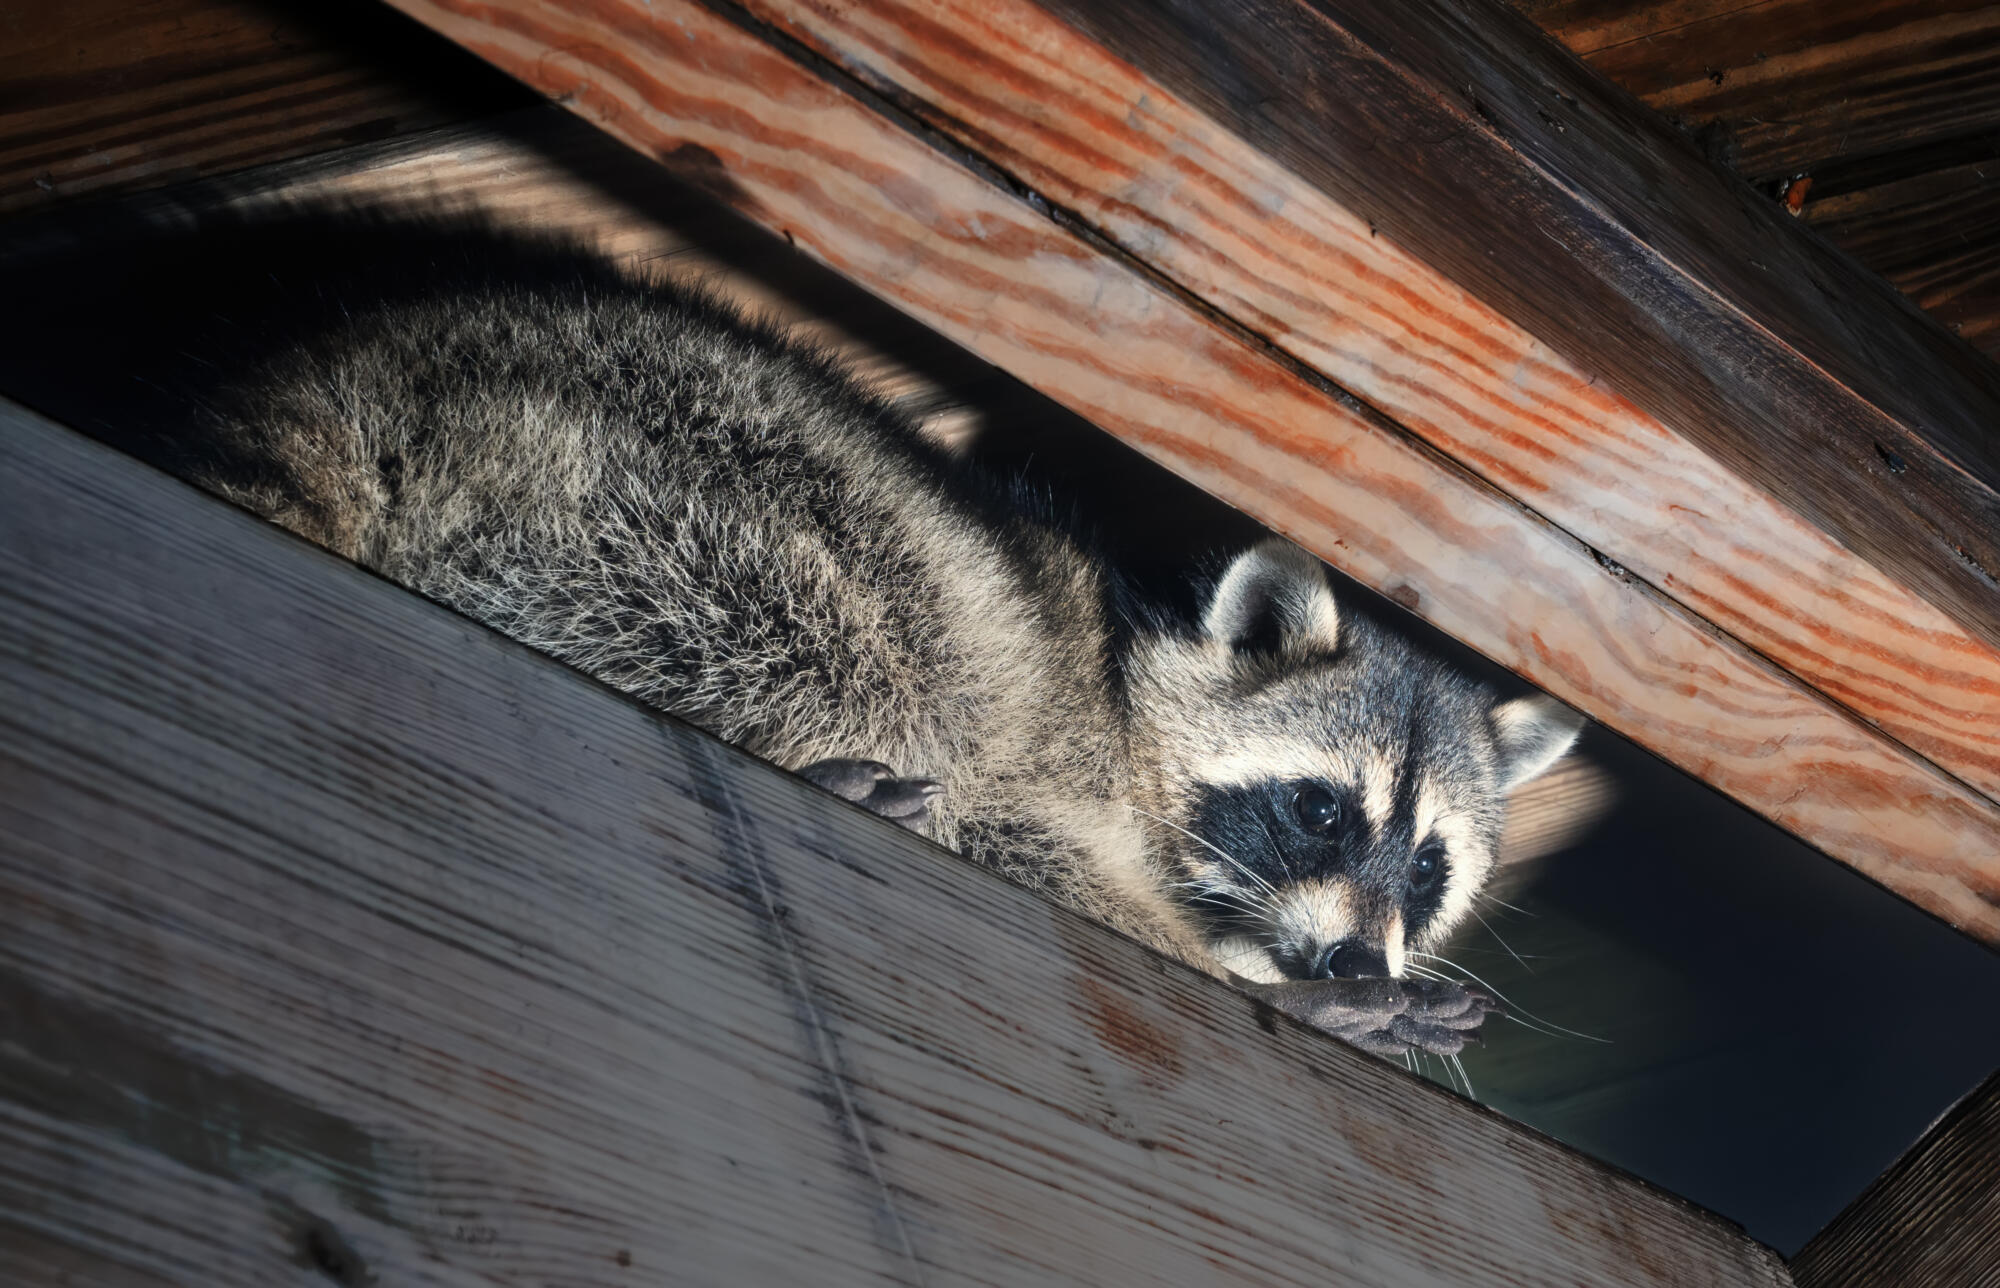 A raccoon peeking out of a window in need of Attic Animal Removal.